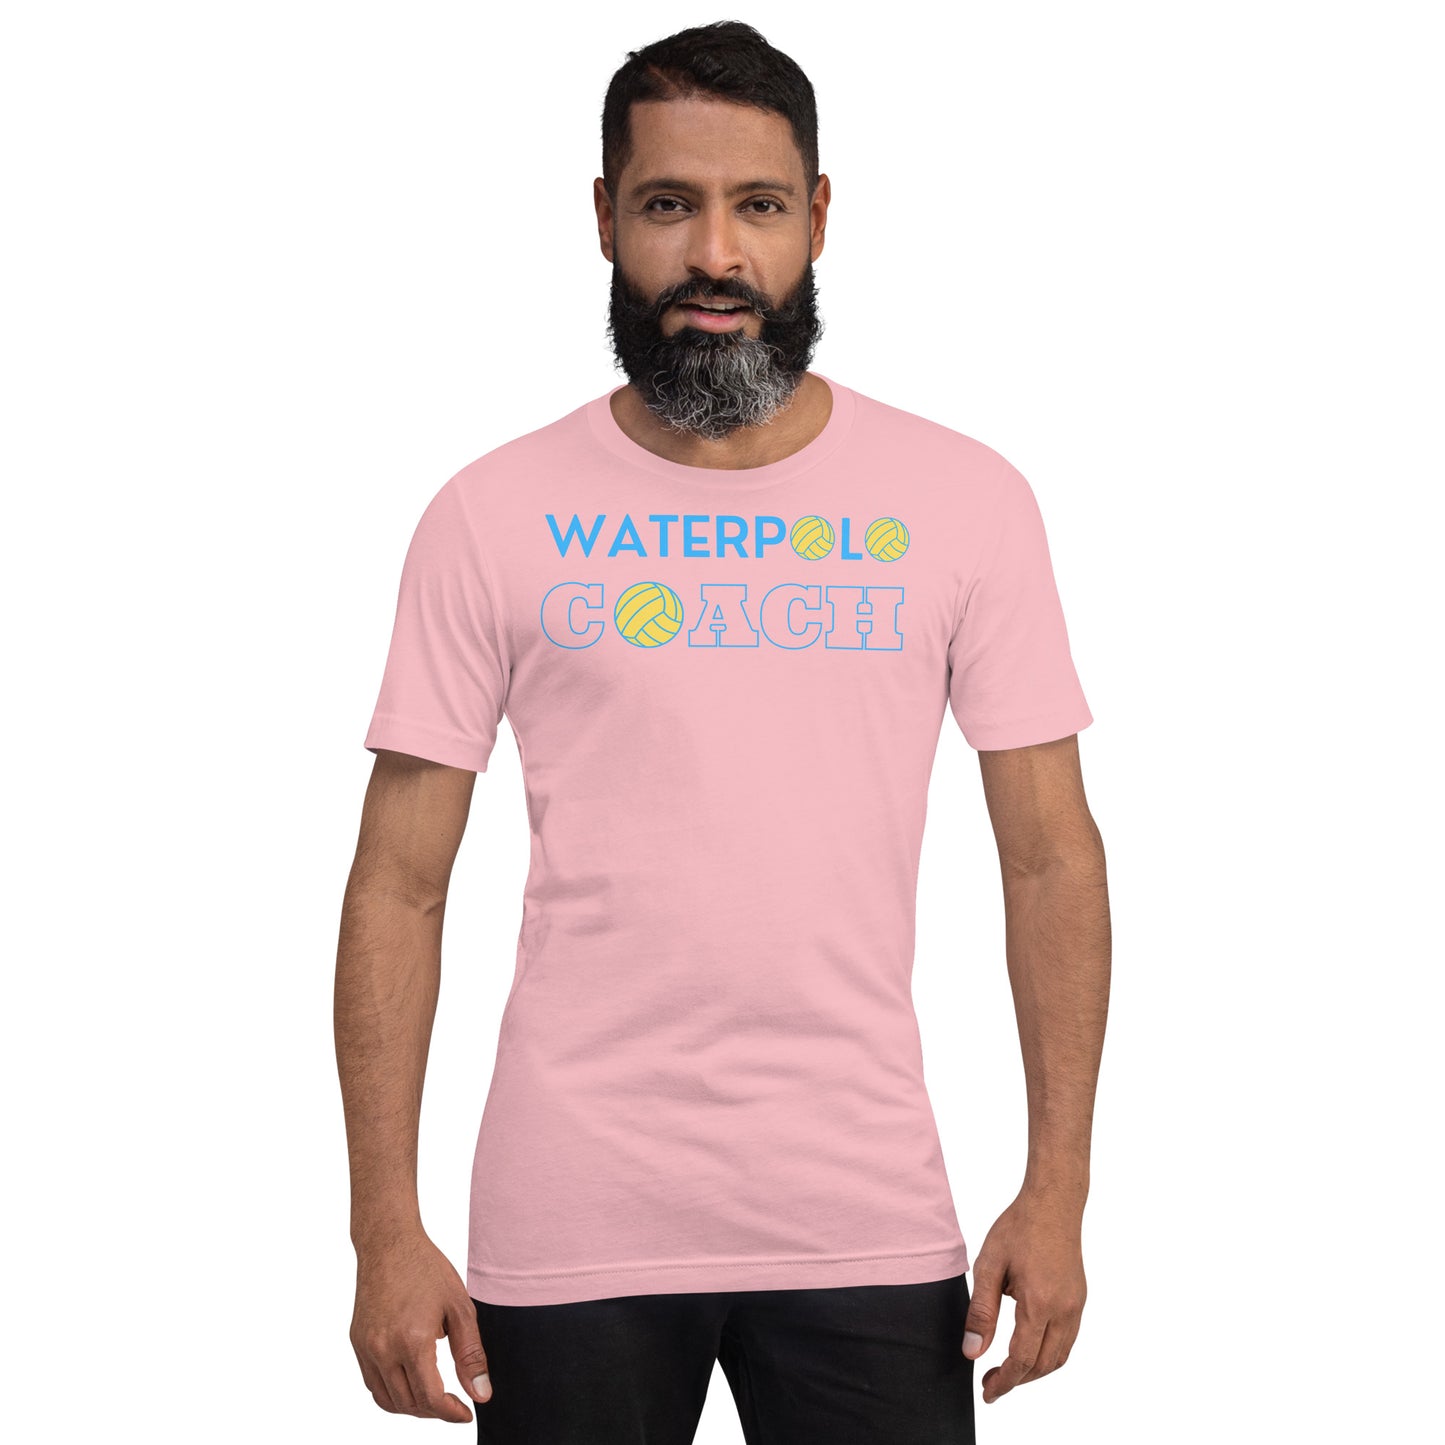 Waterpolo Coach in Blue - Unisex Soft T-shirt - Bella Canvas 3001